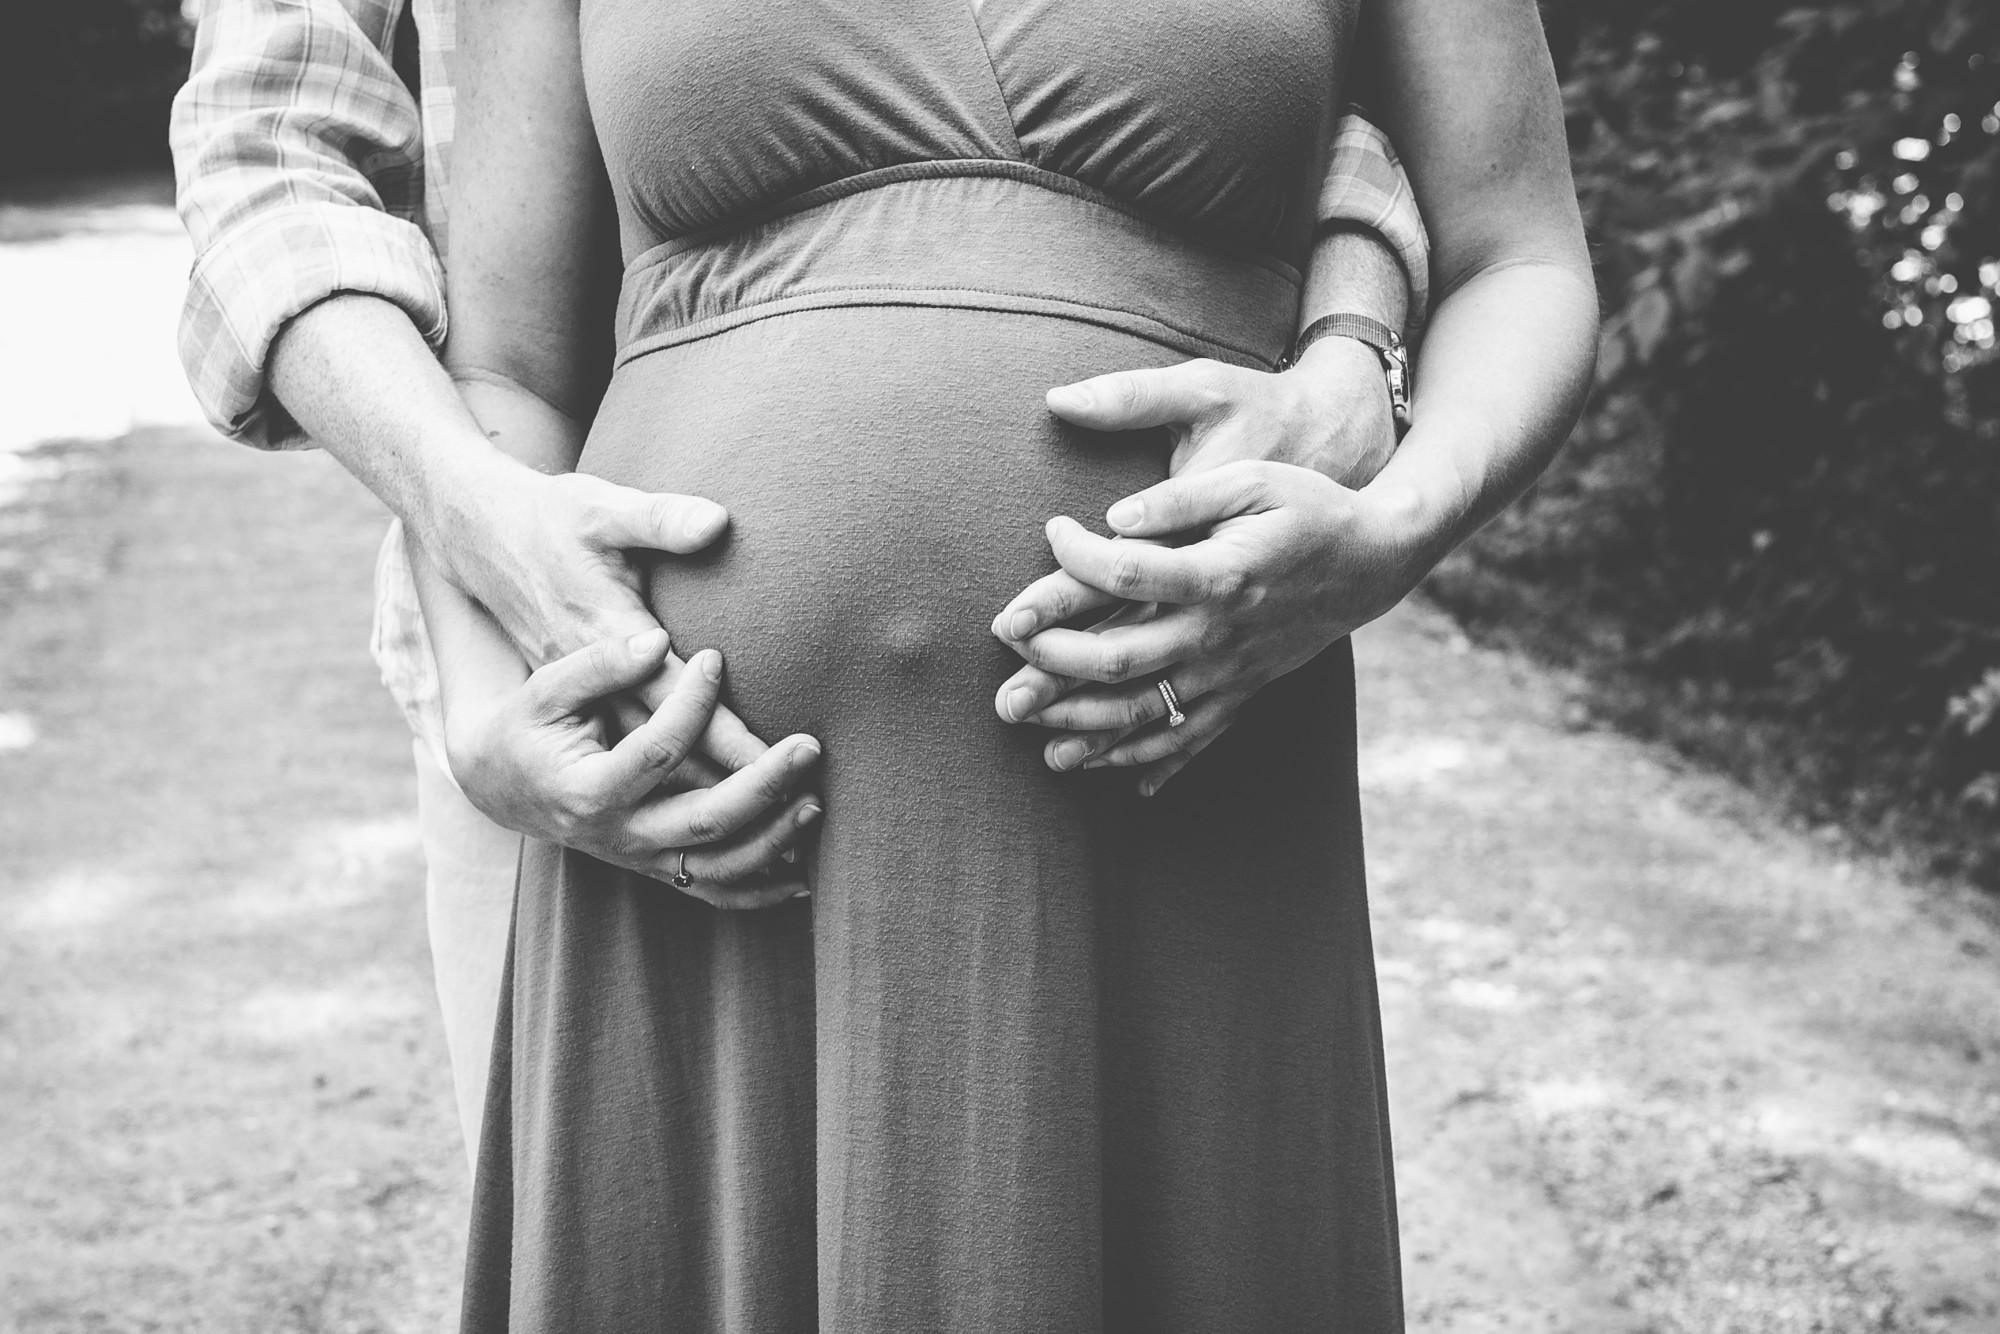 maternity photographer, What You Need to Know About Hiring a Maternity and Newborn Photographer